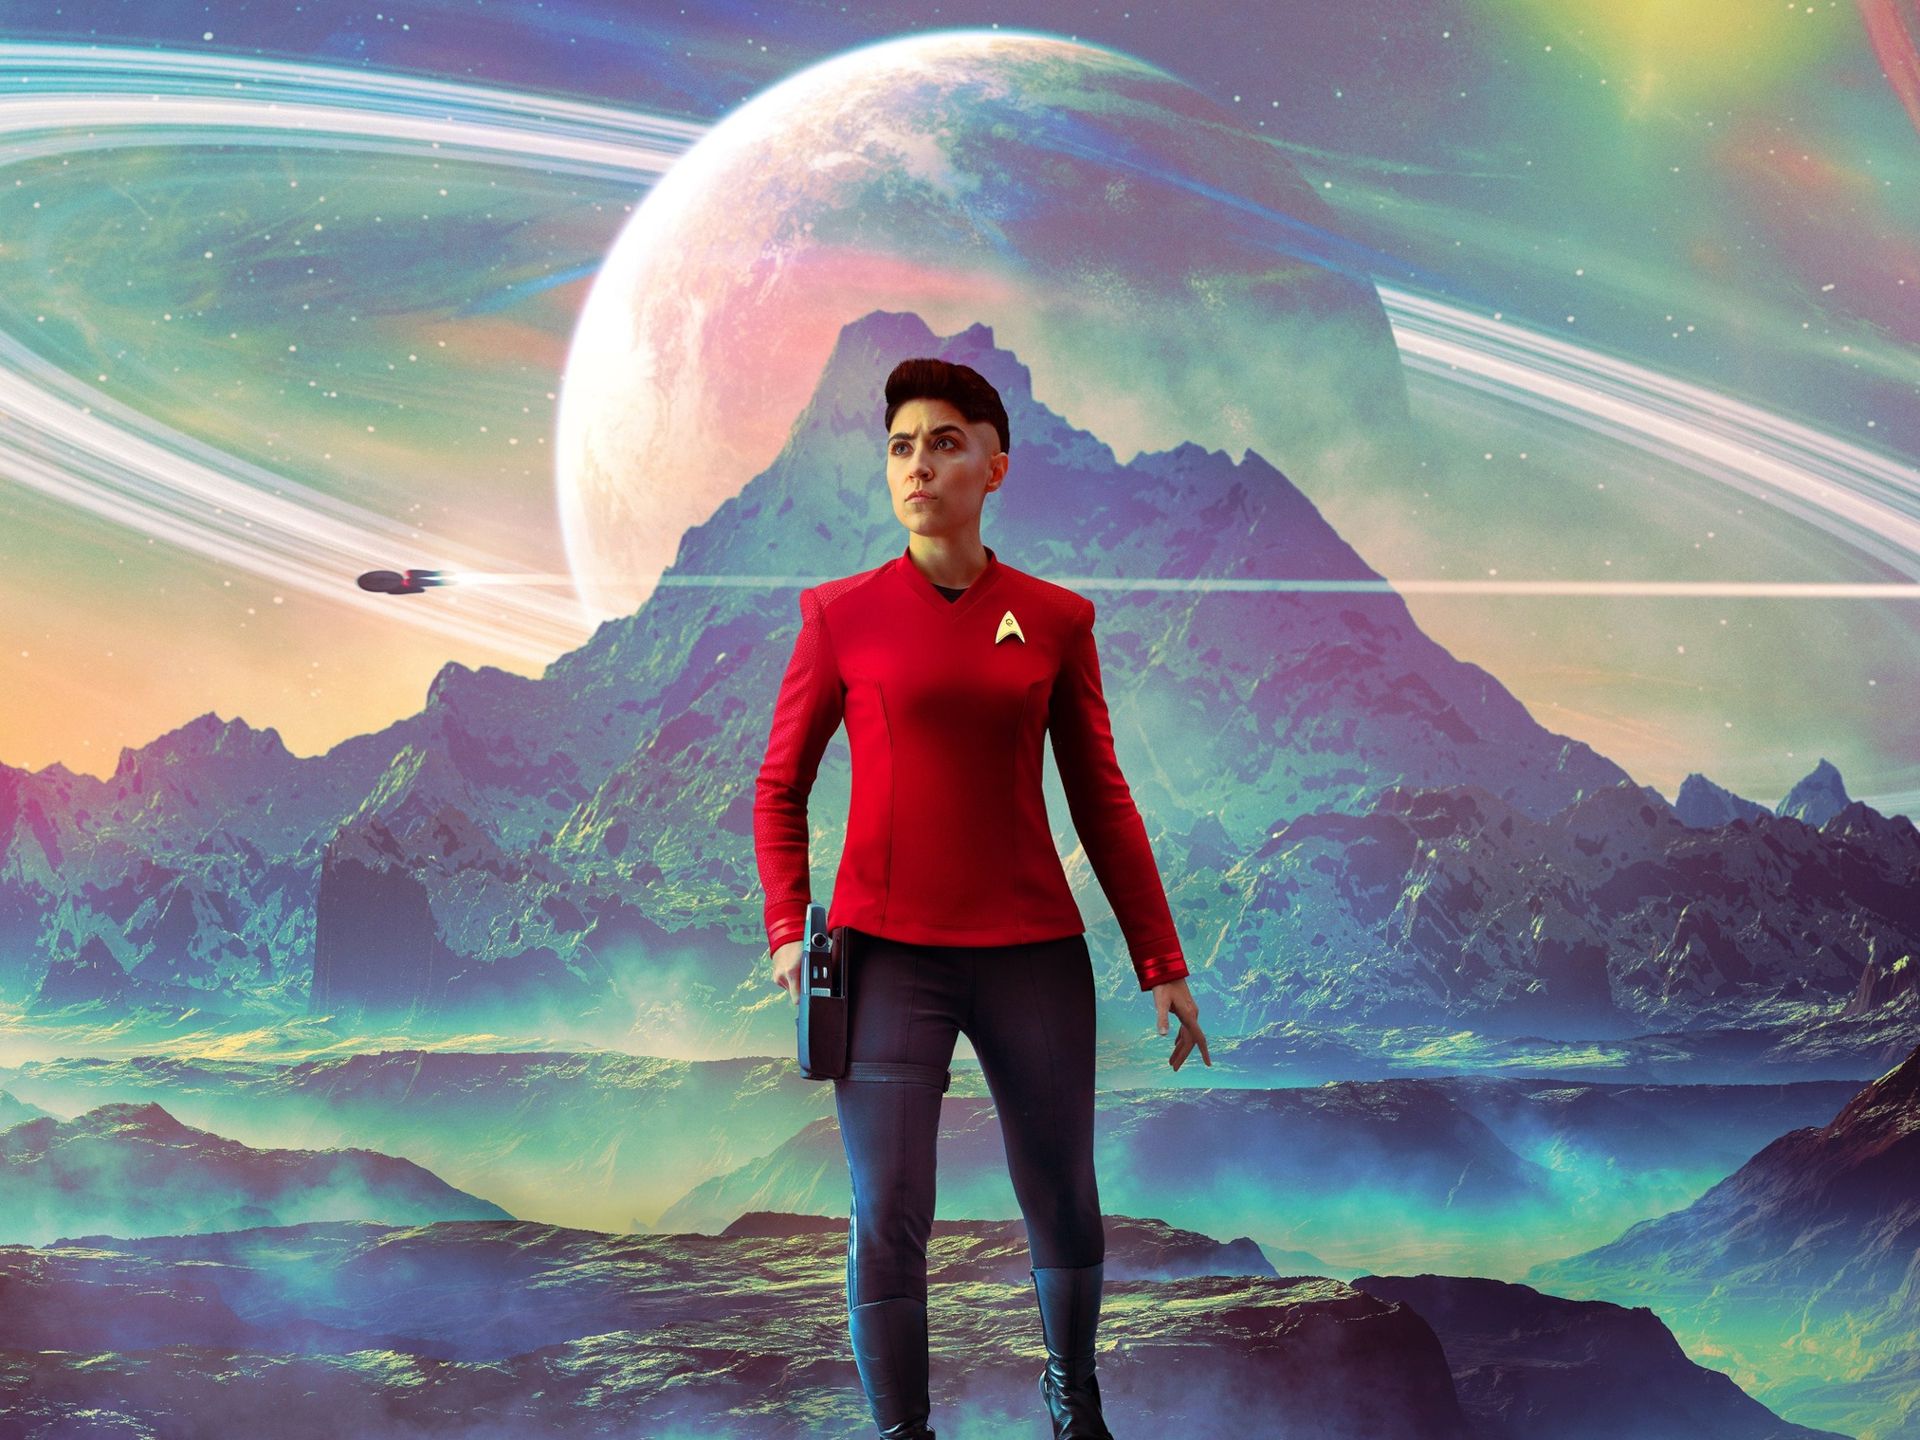 A woman in a Star Trek uniform stands on a hilltop with a planet in the background. - Star Trek